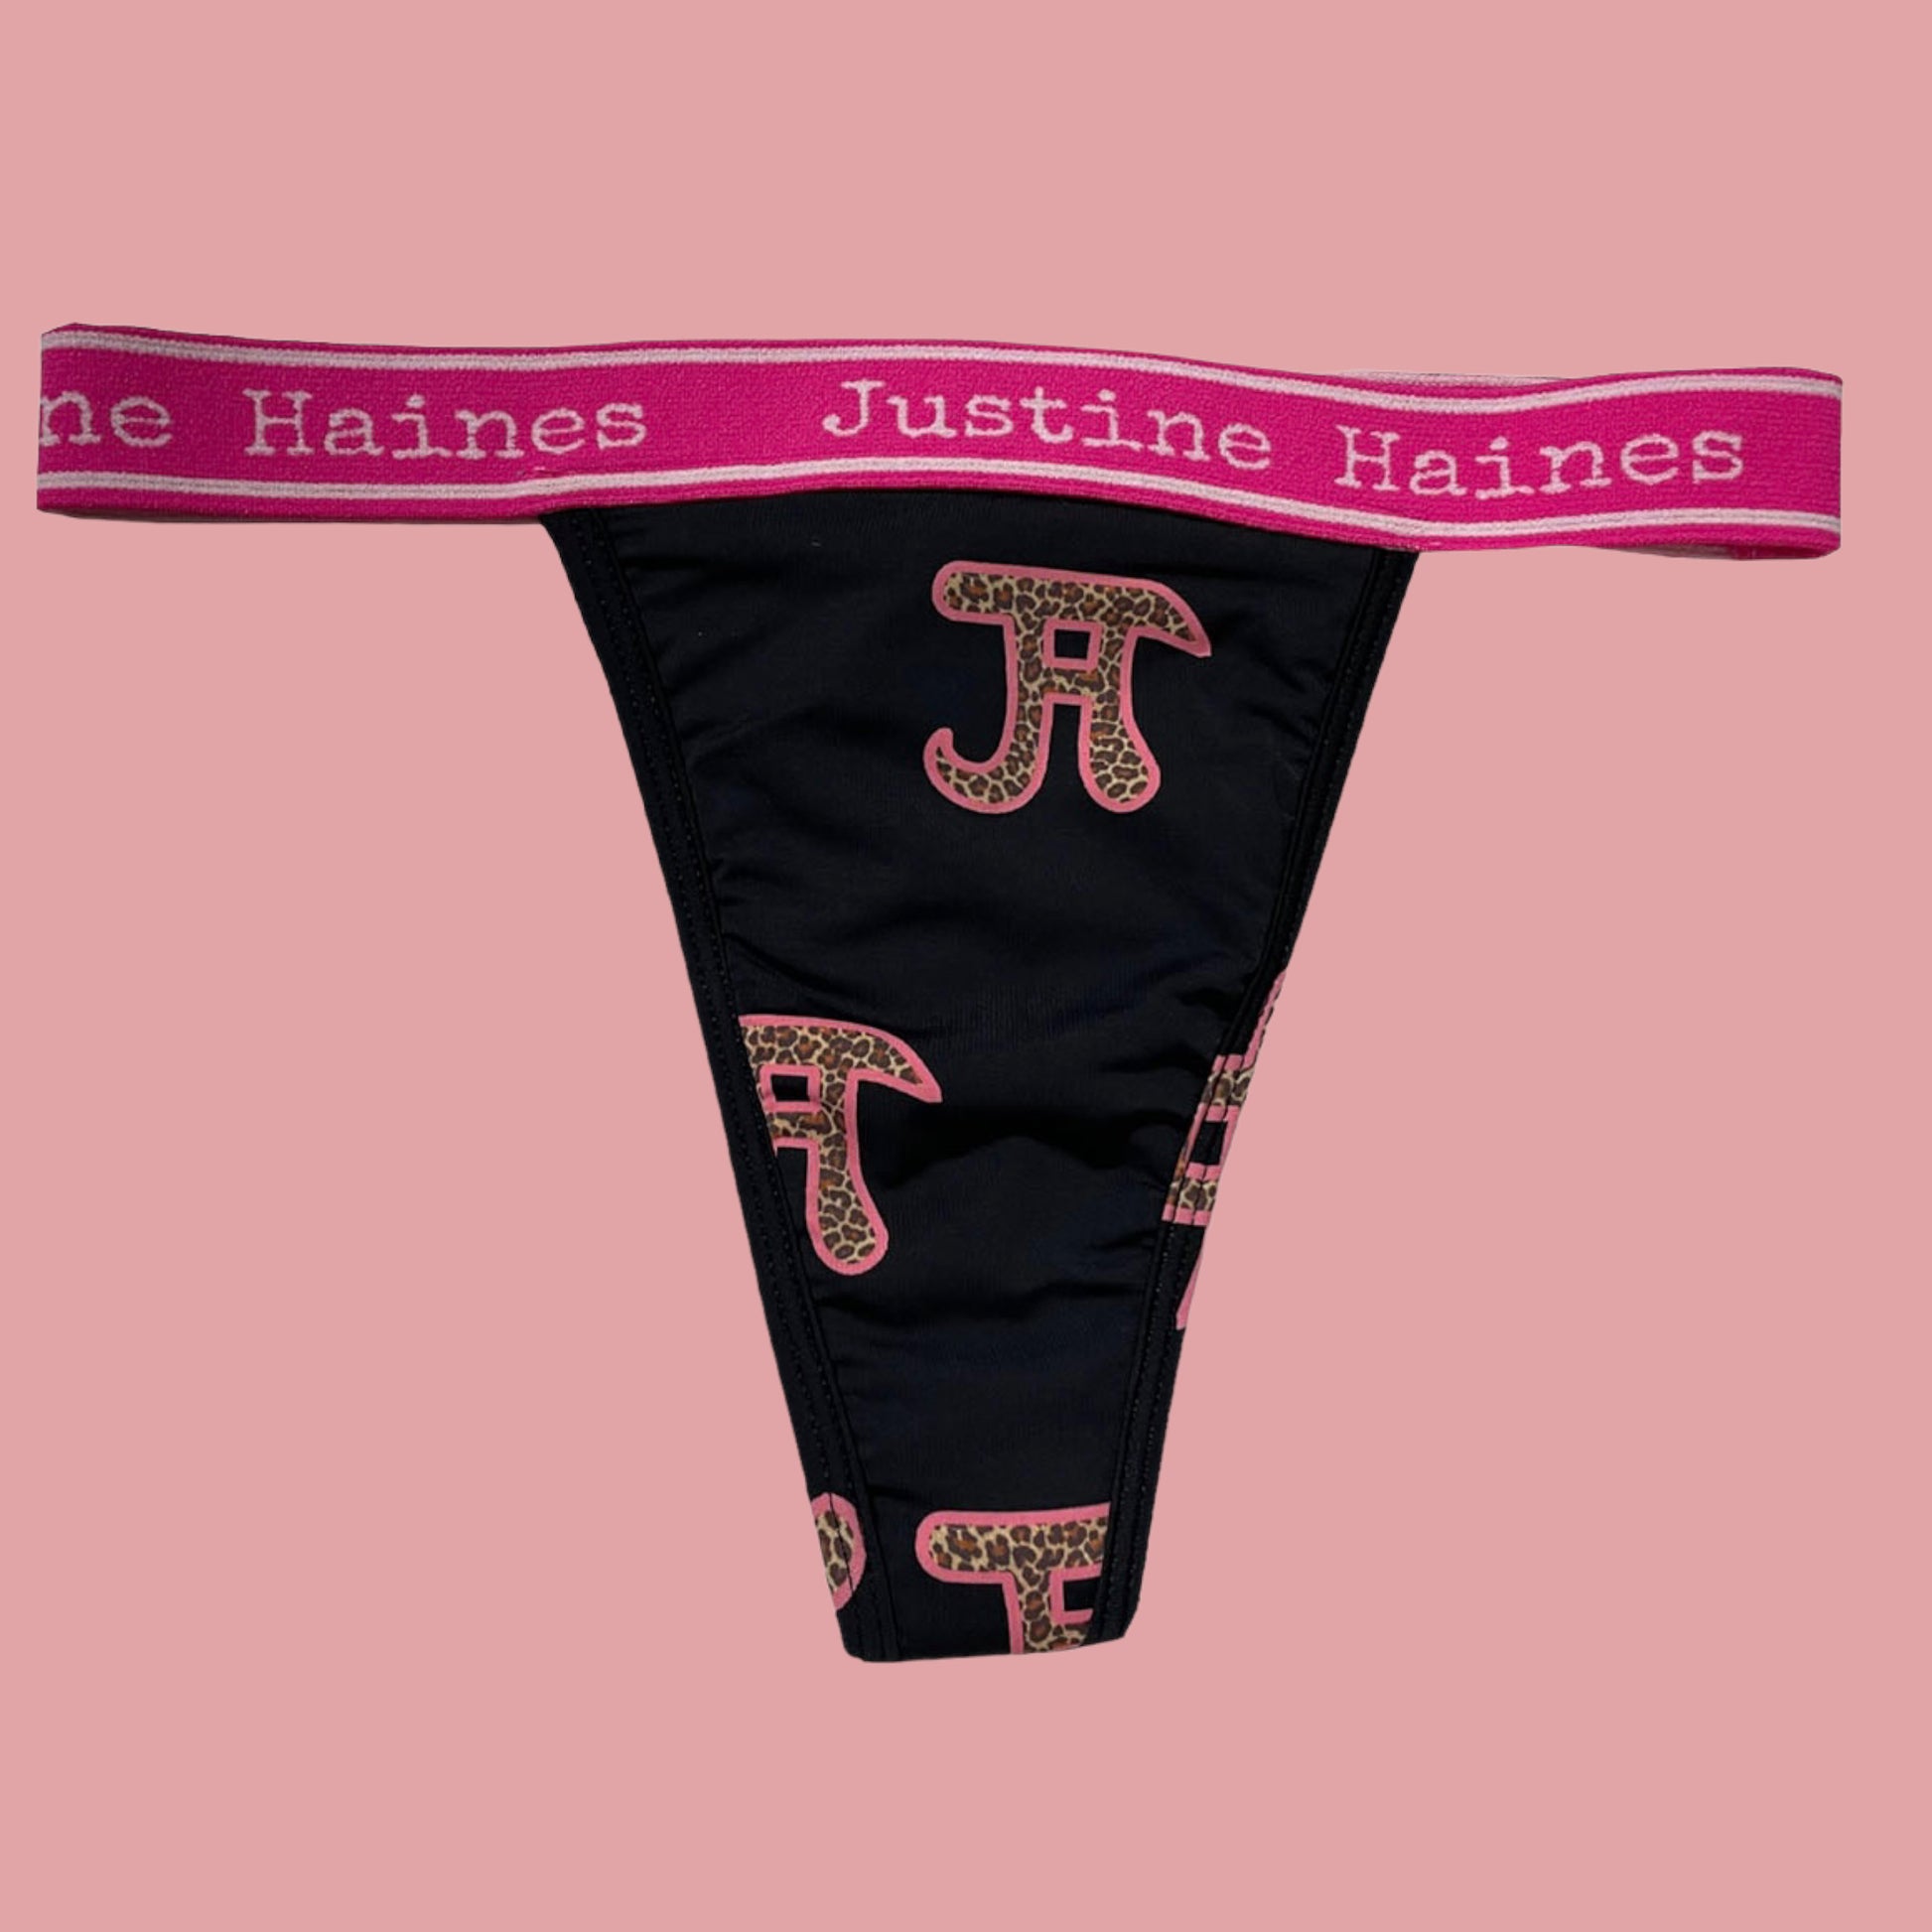 https://www.justinehaines.com/products/wear-thongs-on-your-period-jh-logo-with-leopard